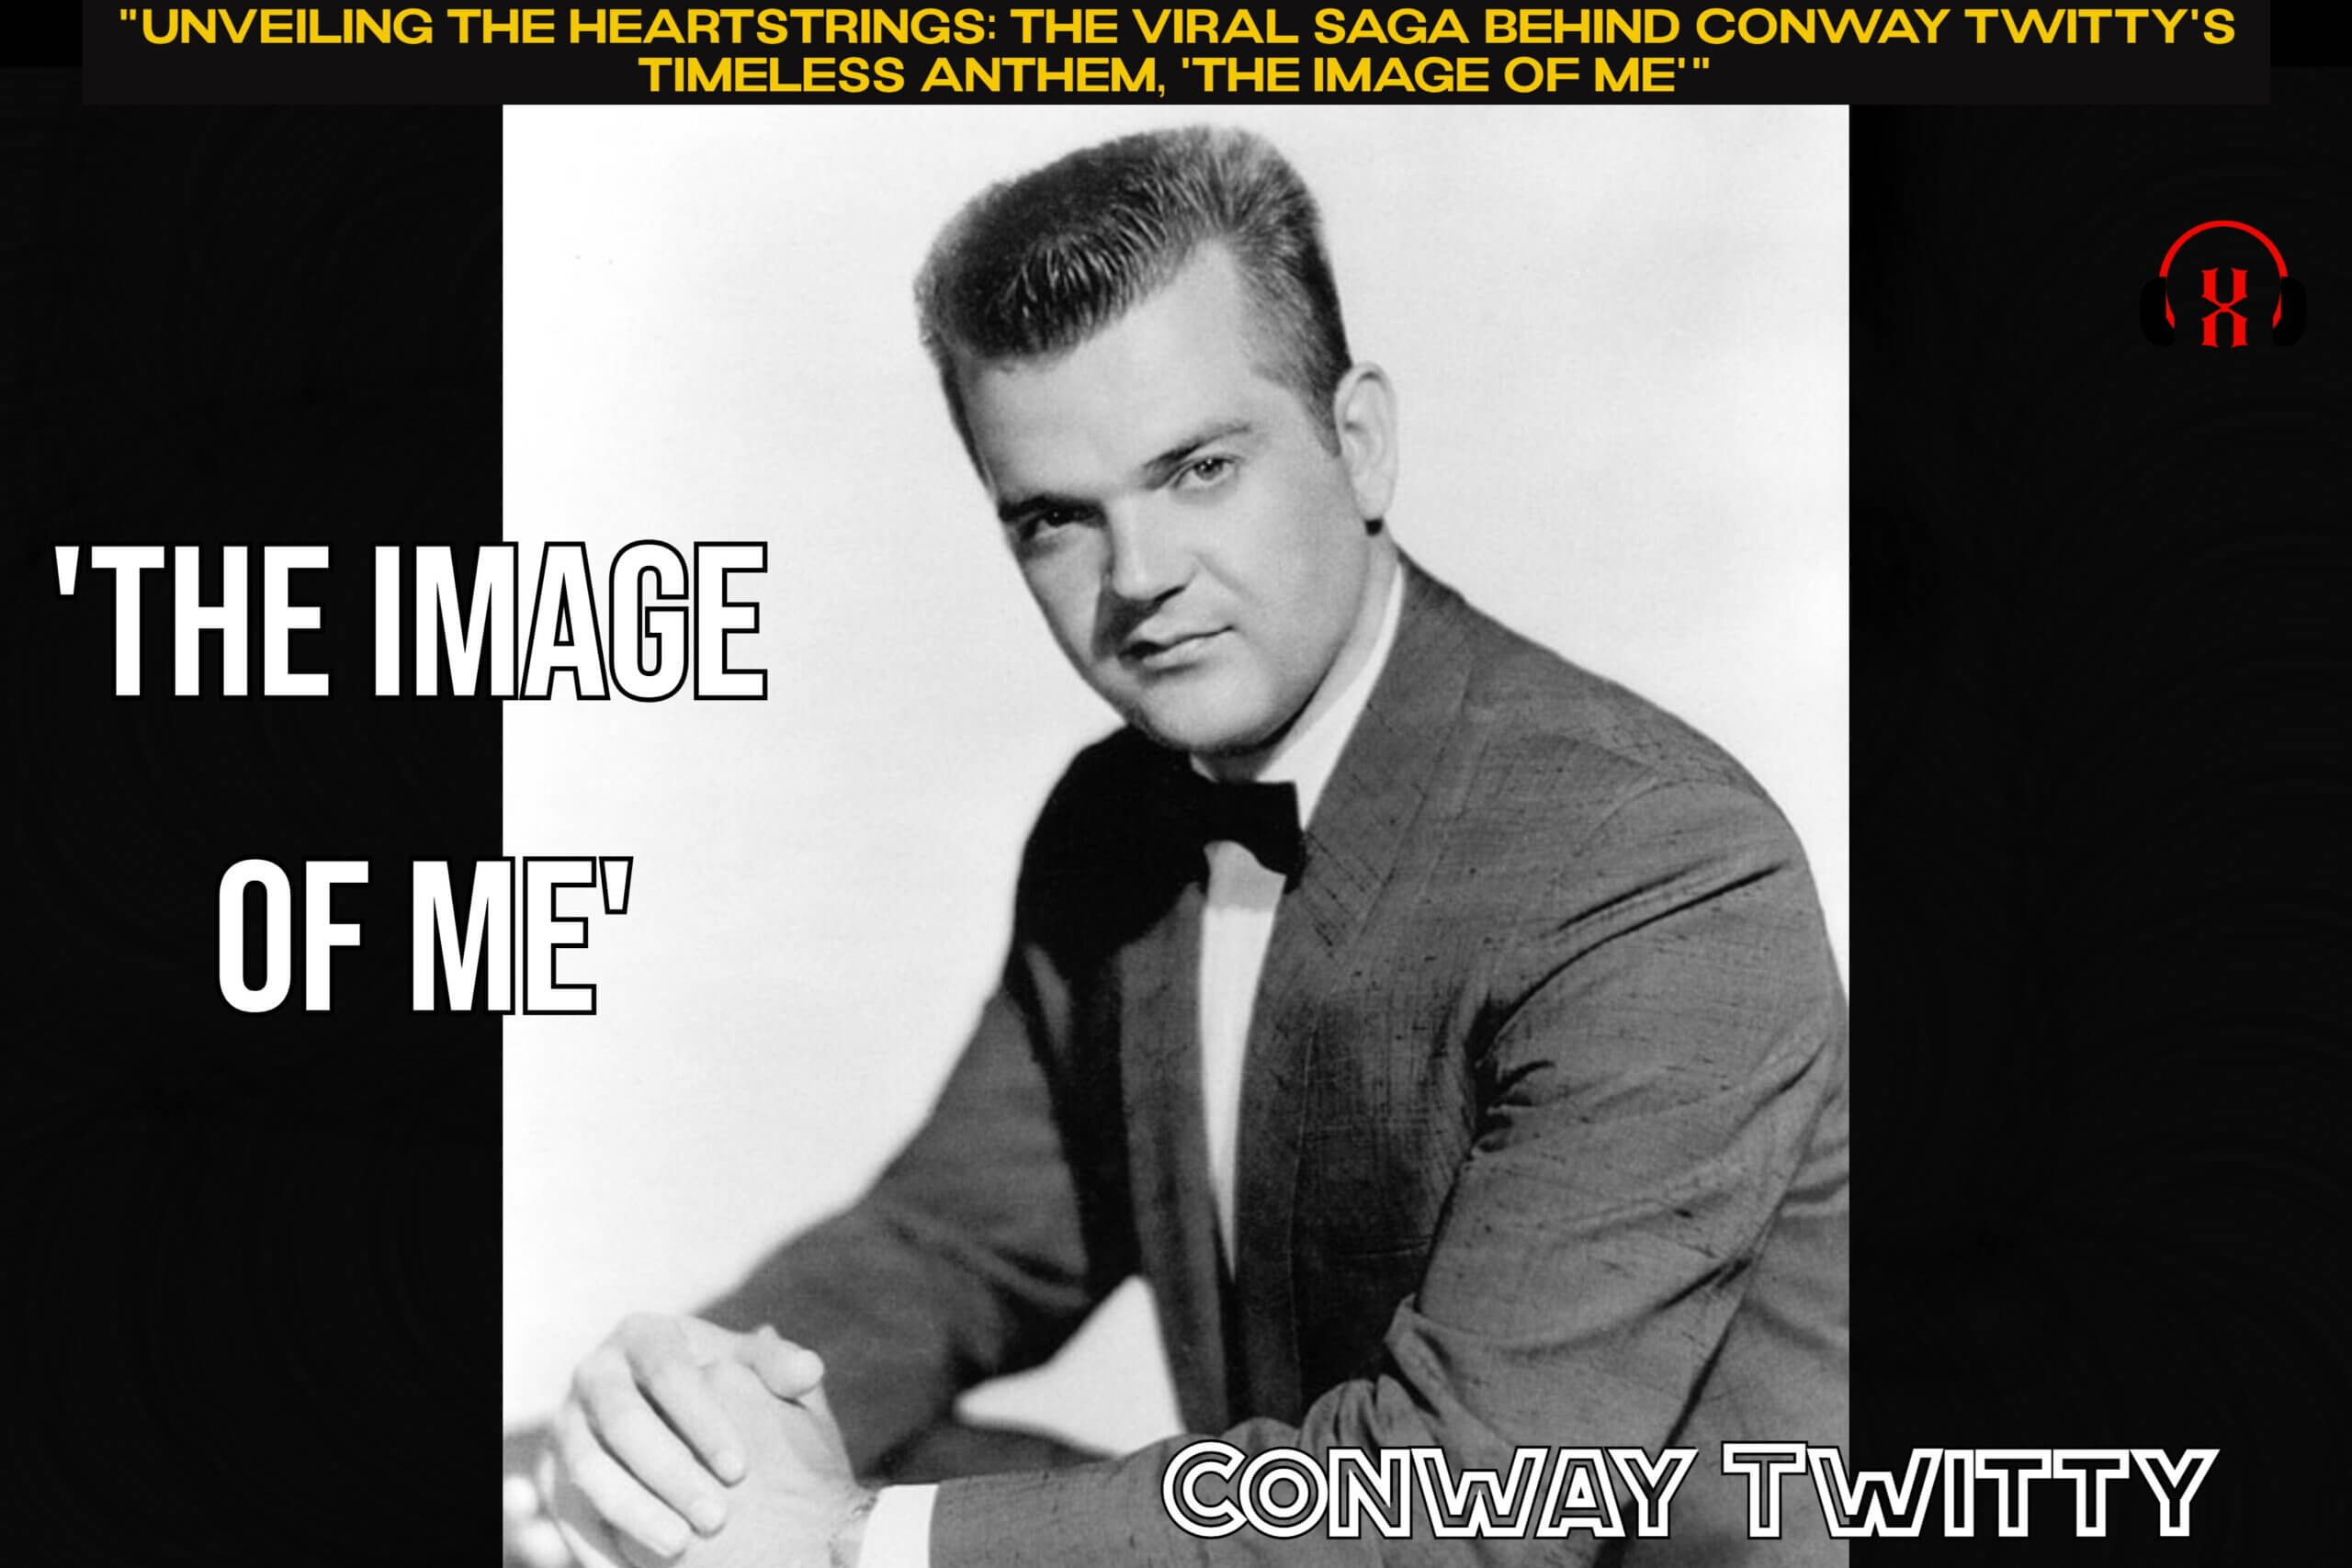 “Unveiling the Heartstrings: The Viral Saga Behind Conway Twitty’s Timeless Anthem, ‘The Image of Me'”